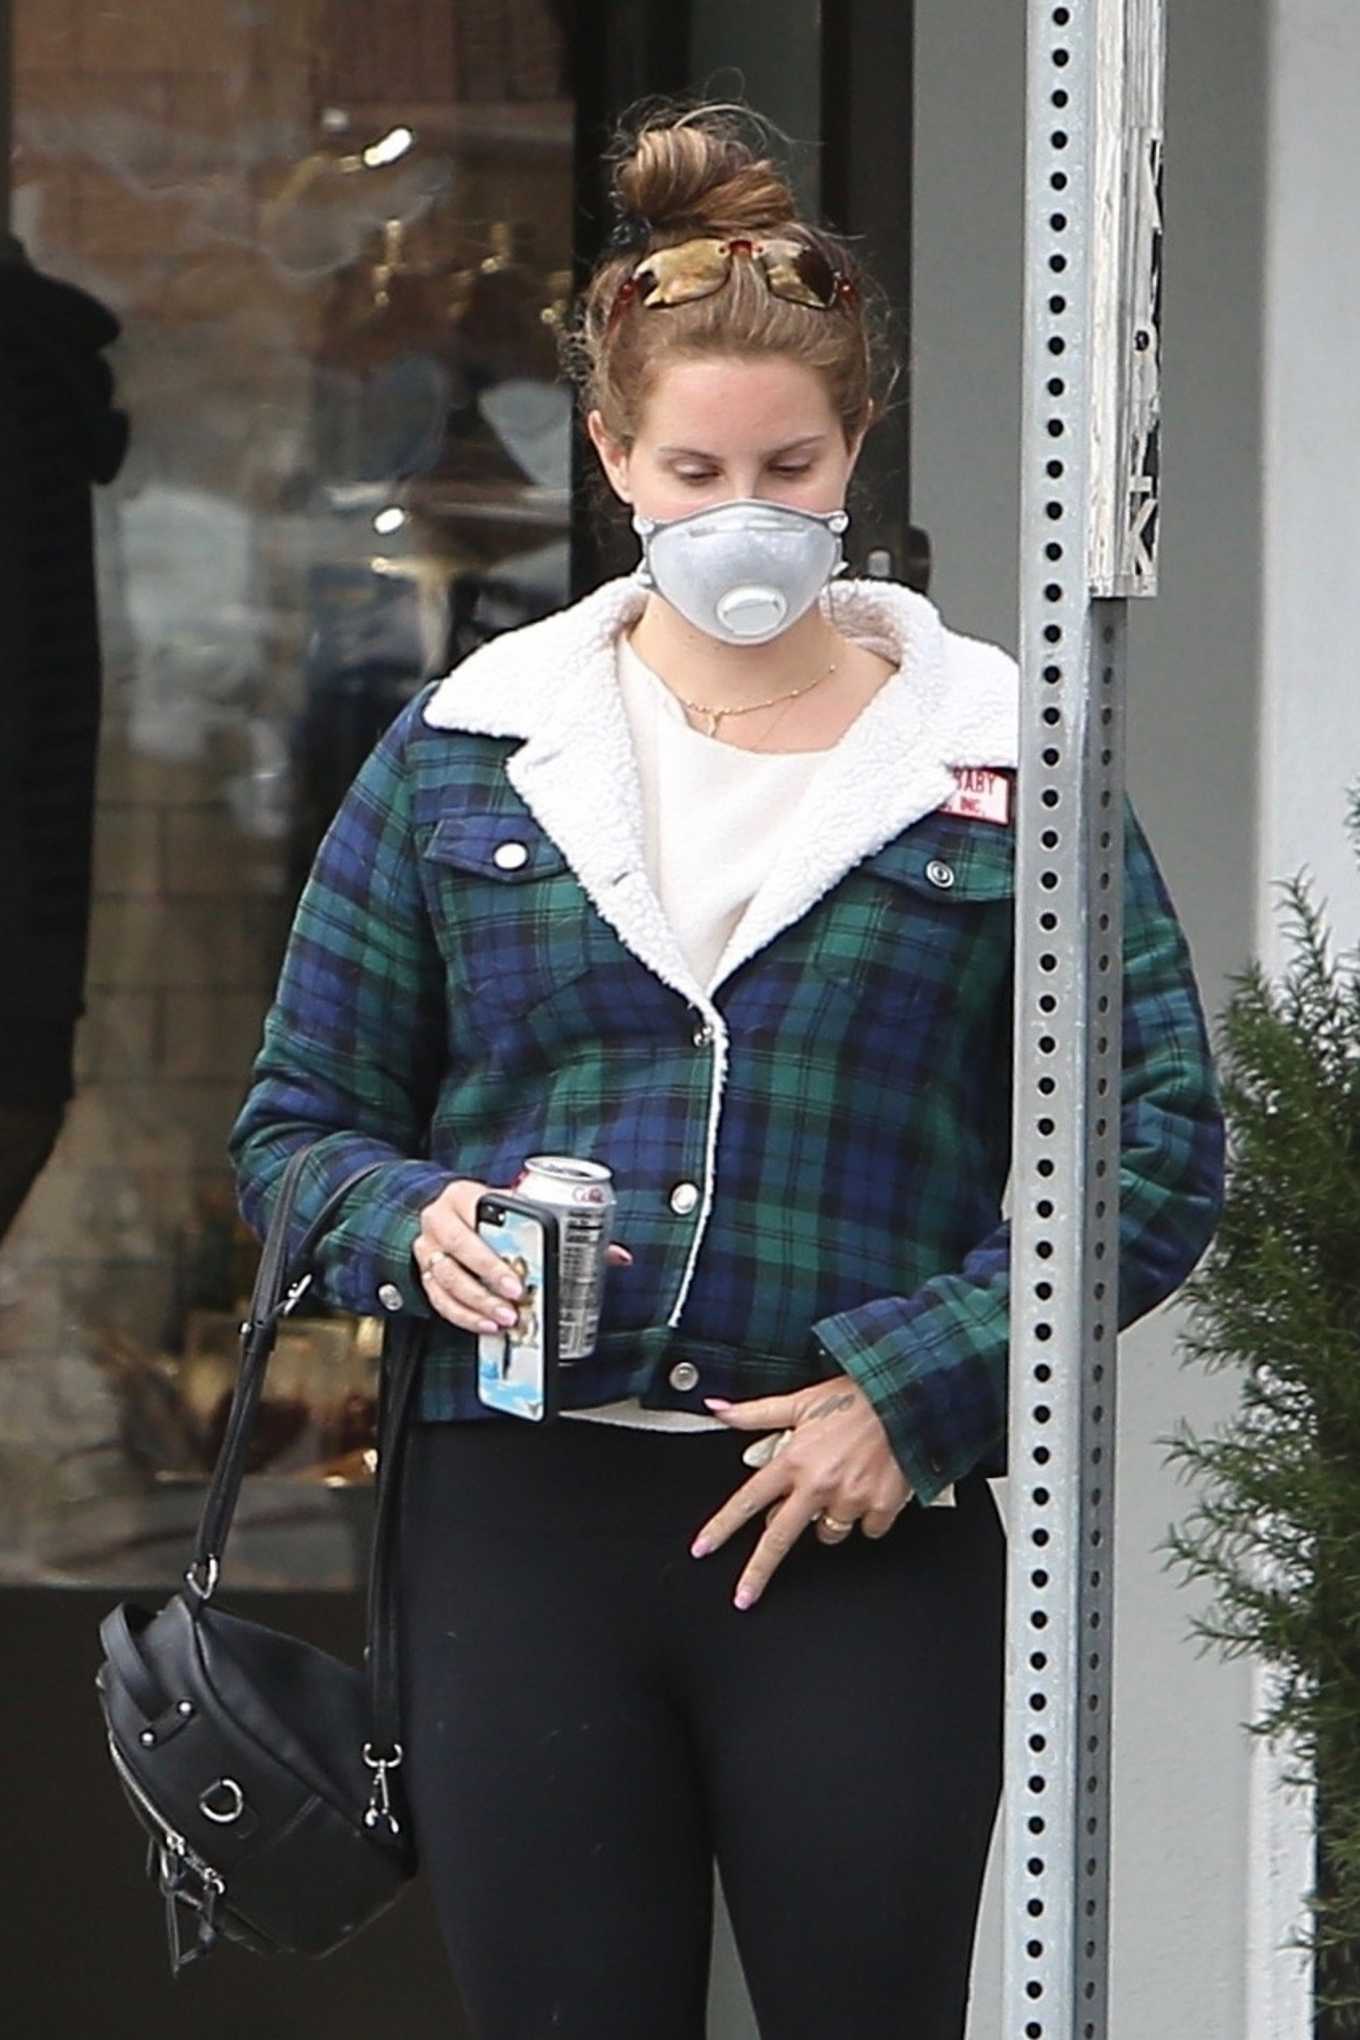 Lana Del Rey â€“ Out with her sister Caroline Grant to run errands through Los Angeles